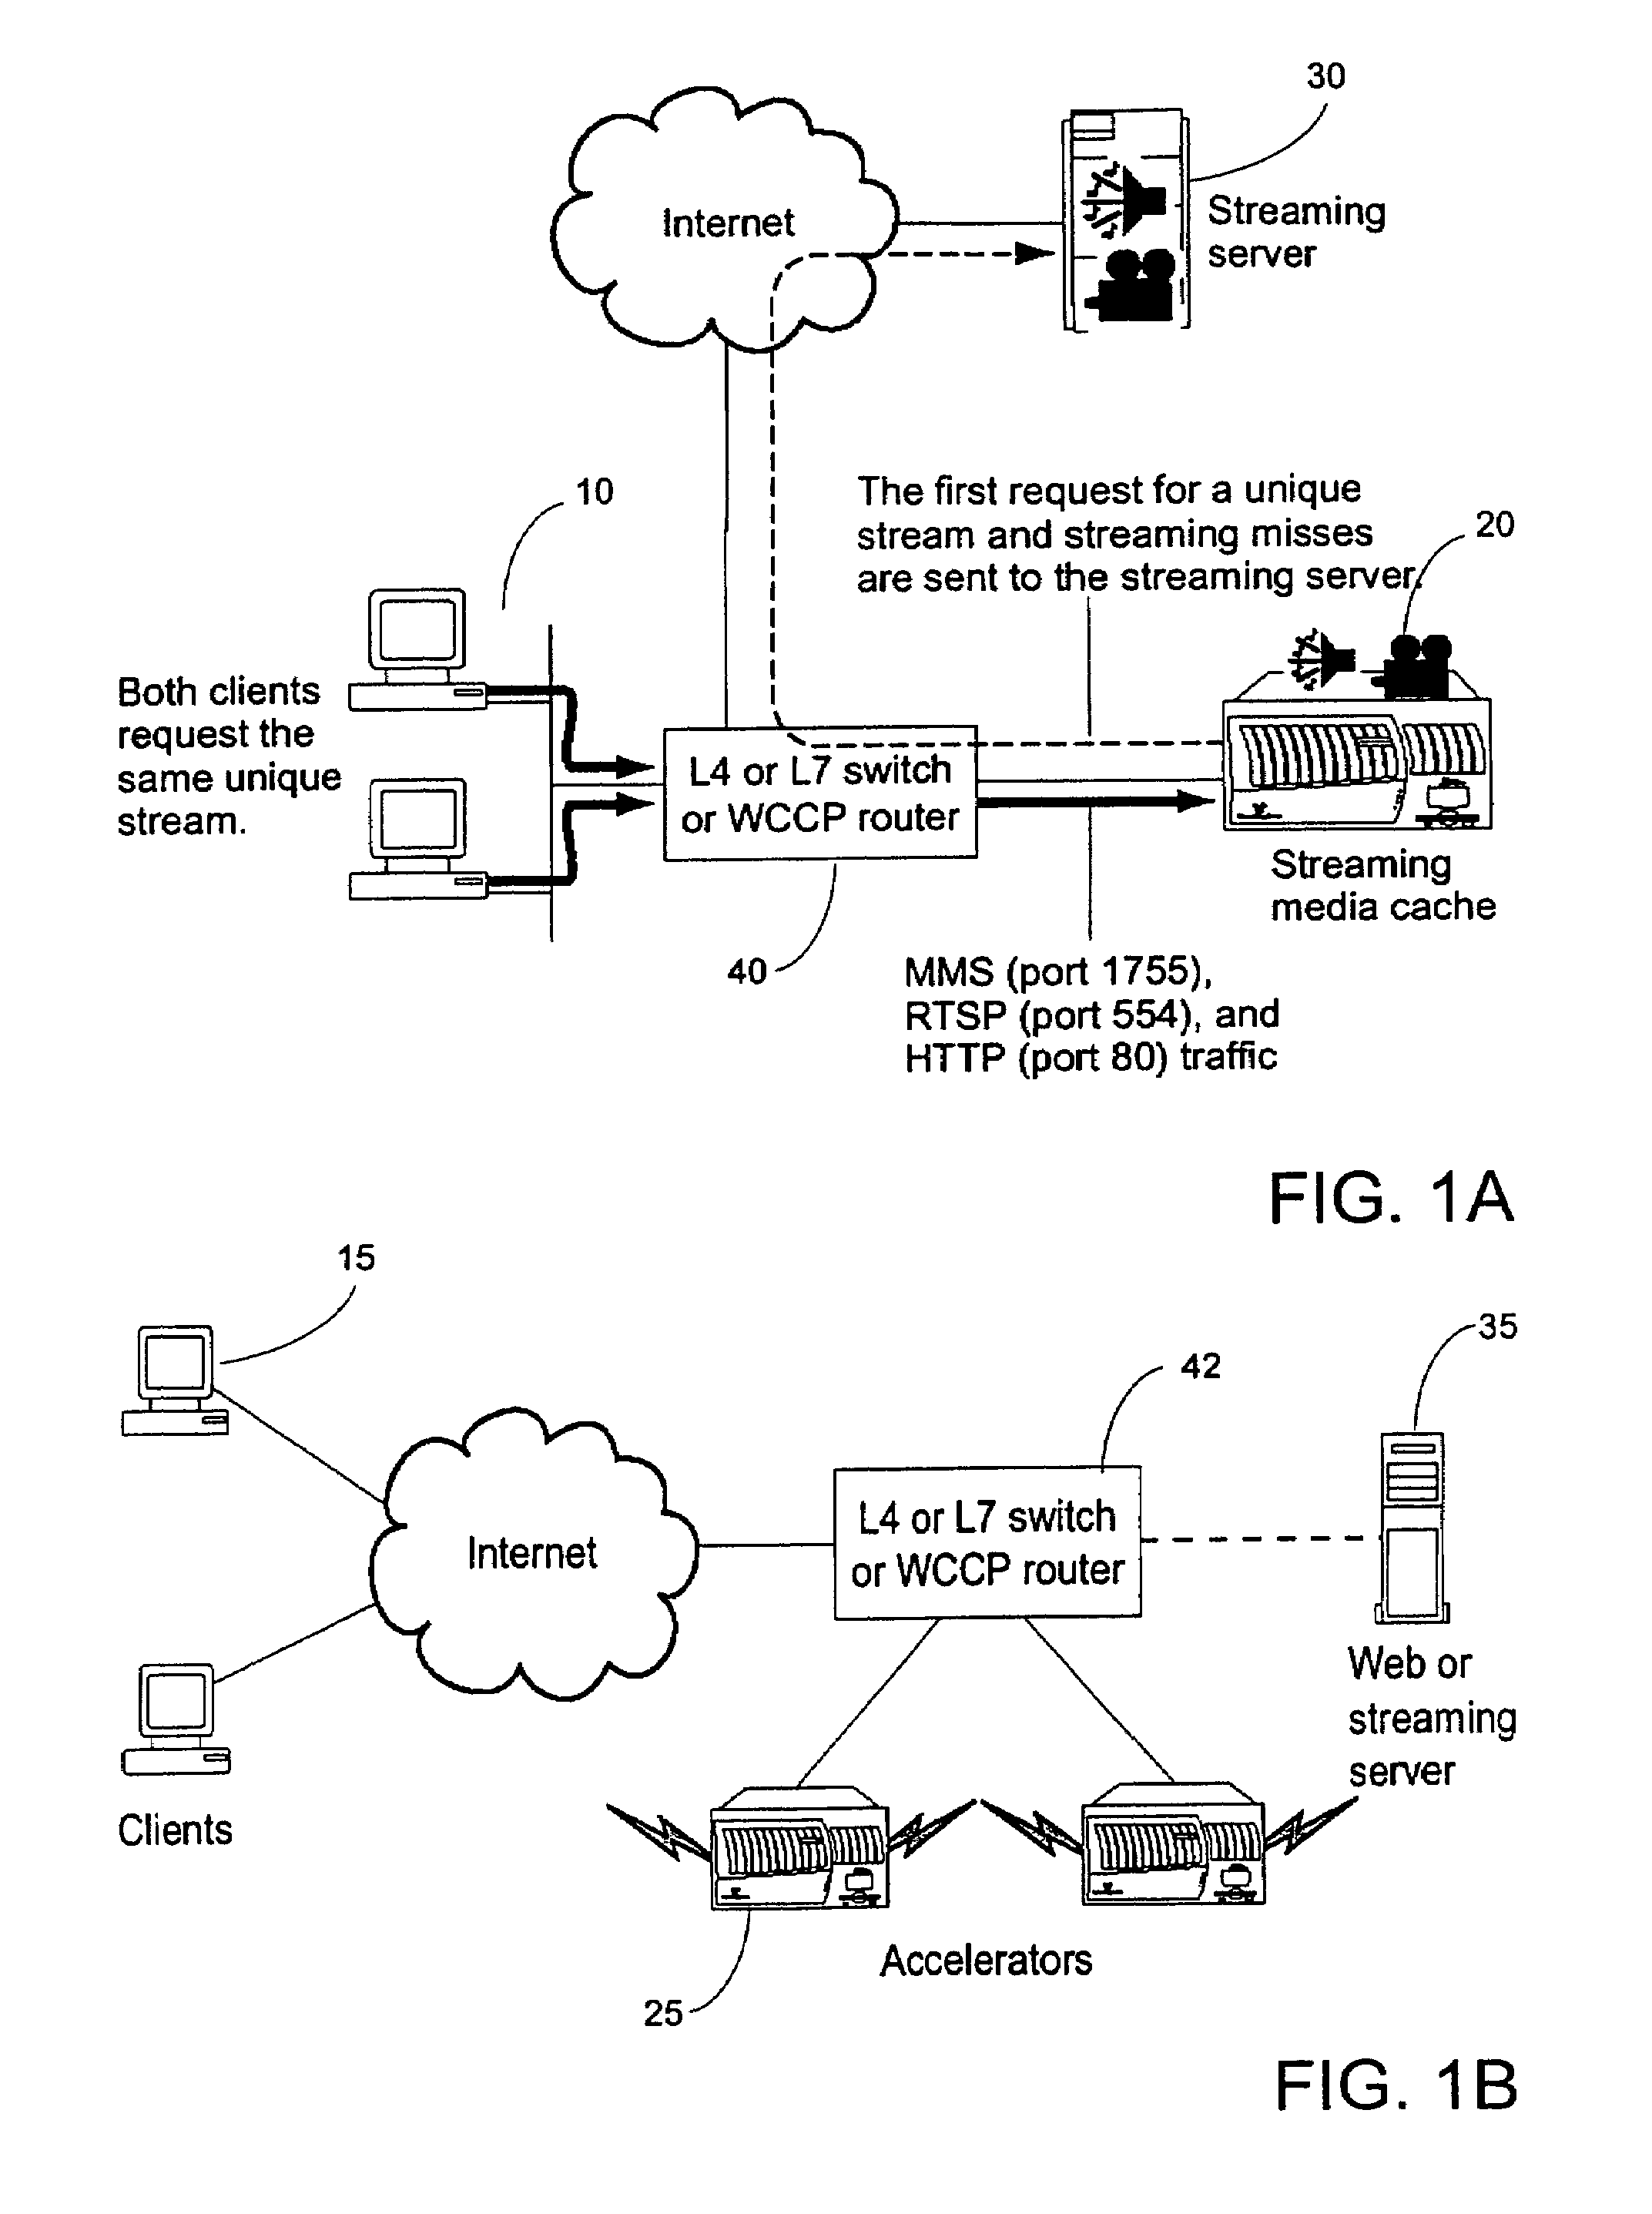 Methods and apparatus for pacing delivery of streaming media data